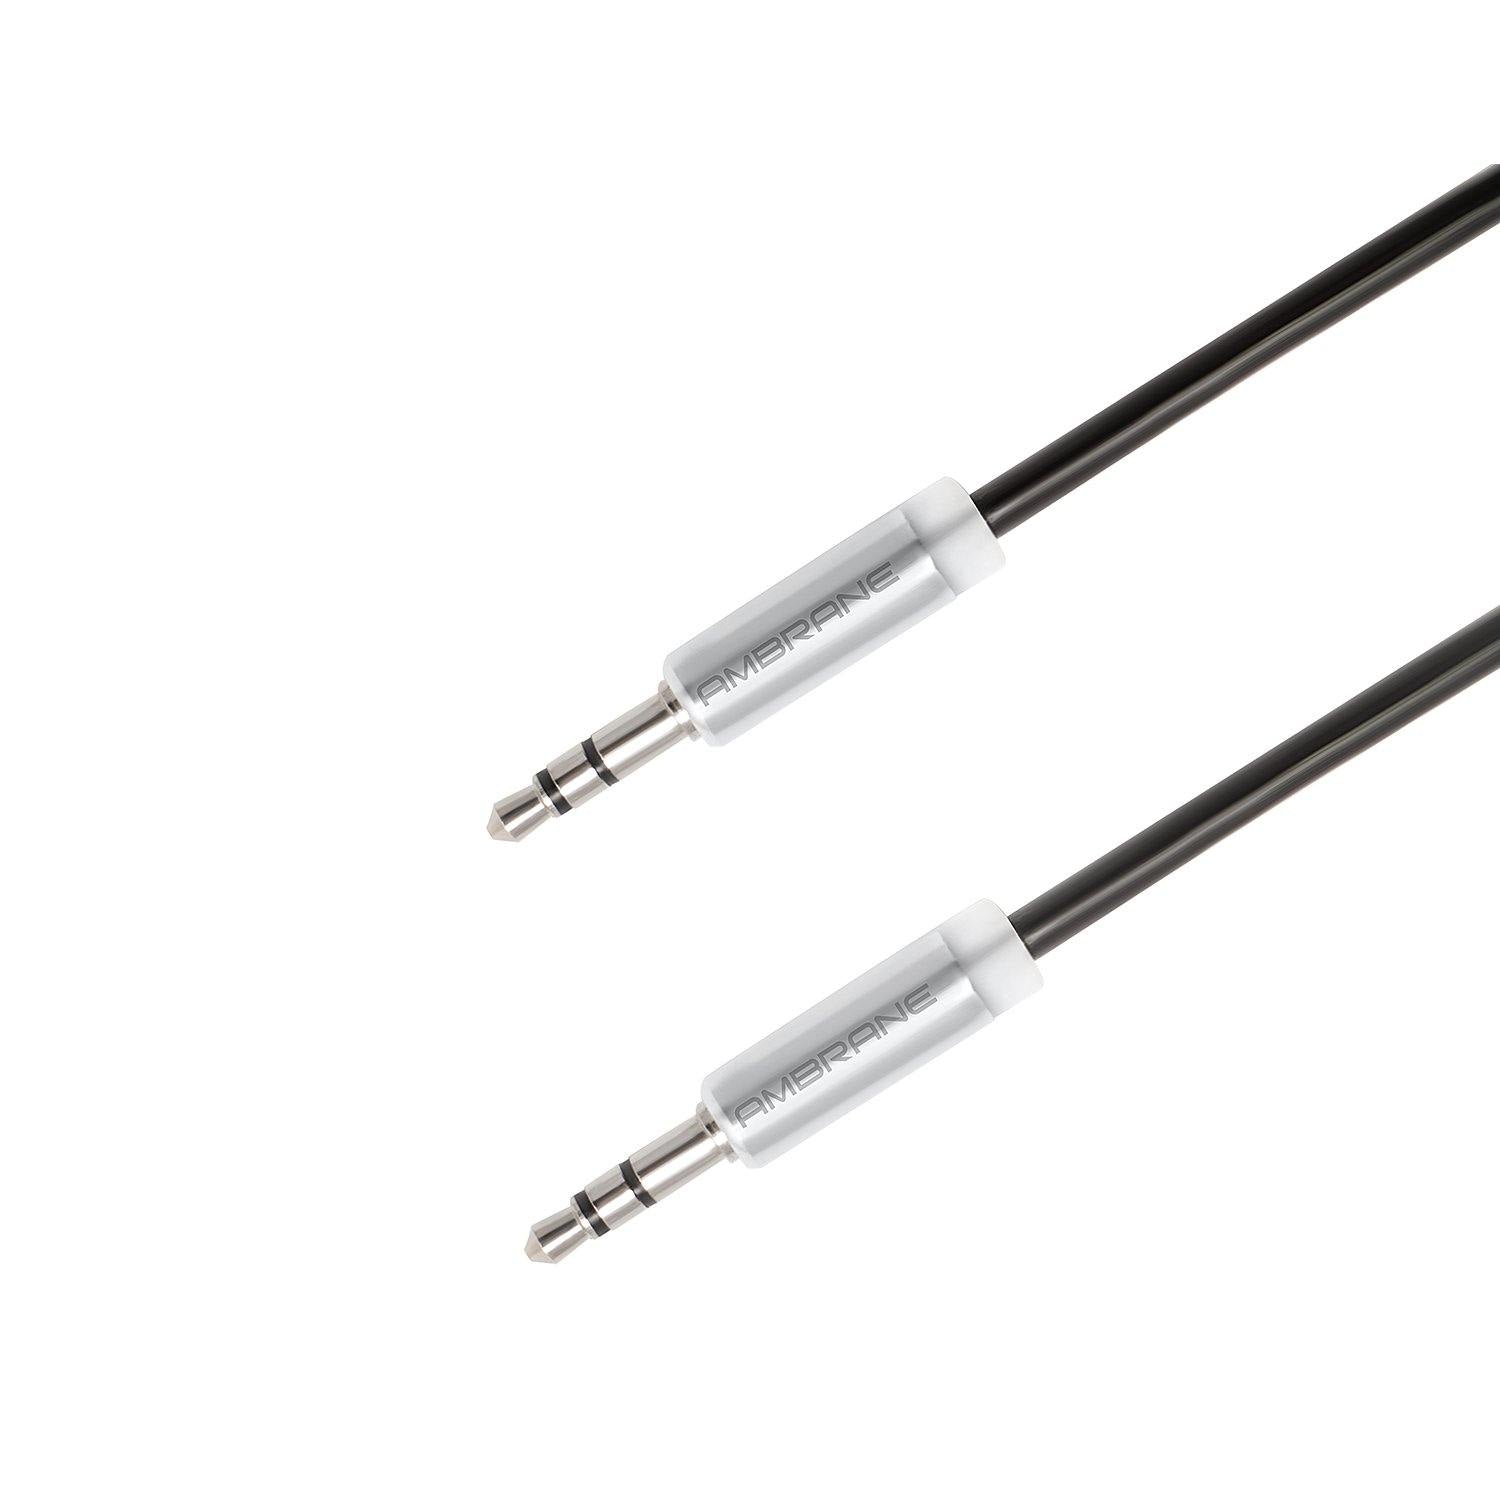 Aux Audio Cable 11 with 3.5mm (Black) - AmbraneIndia